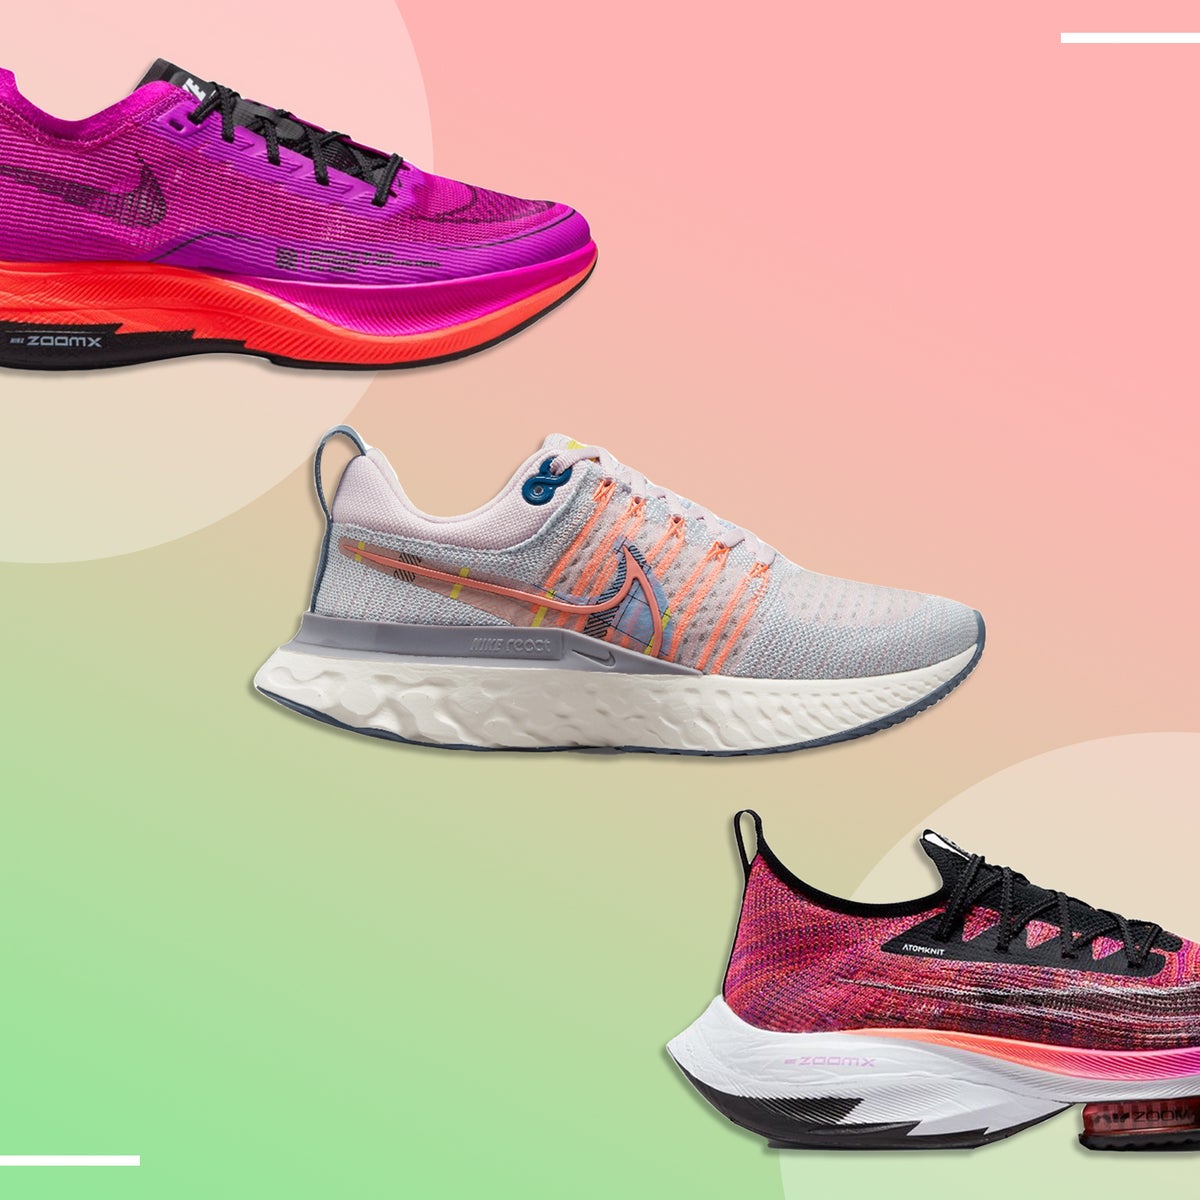 Best Nike running shoes 2022: For trails and road running | The